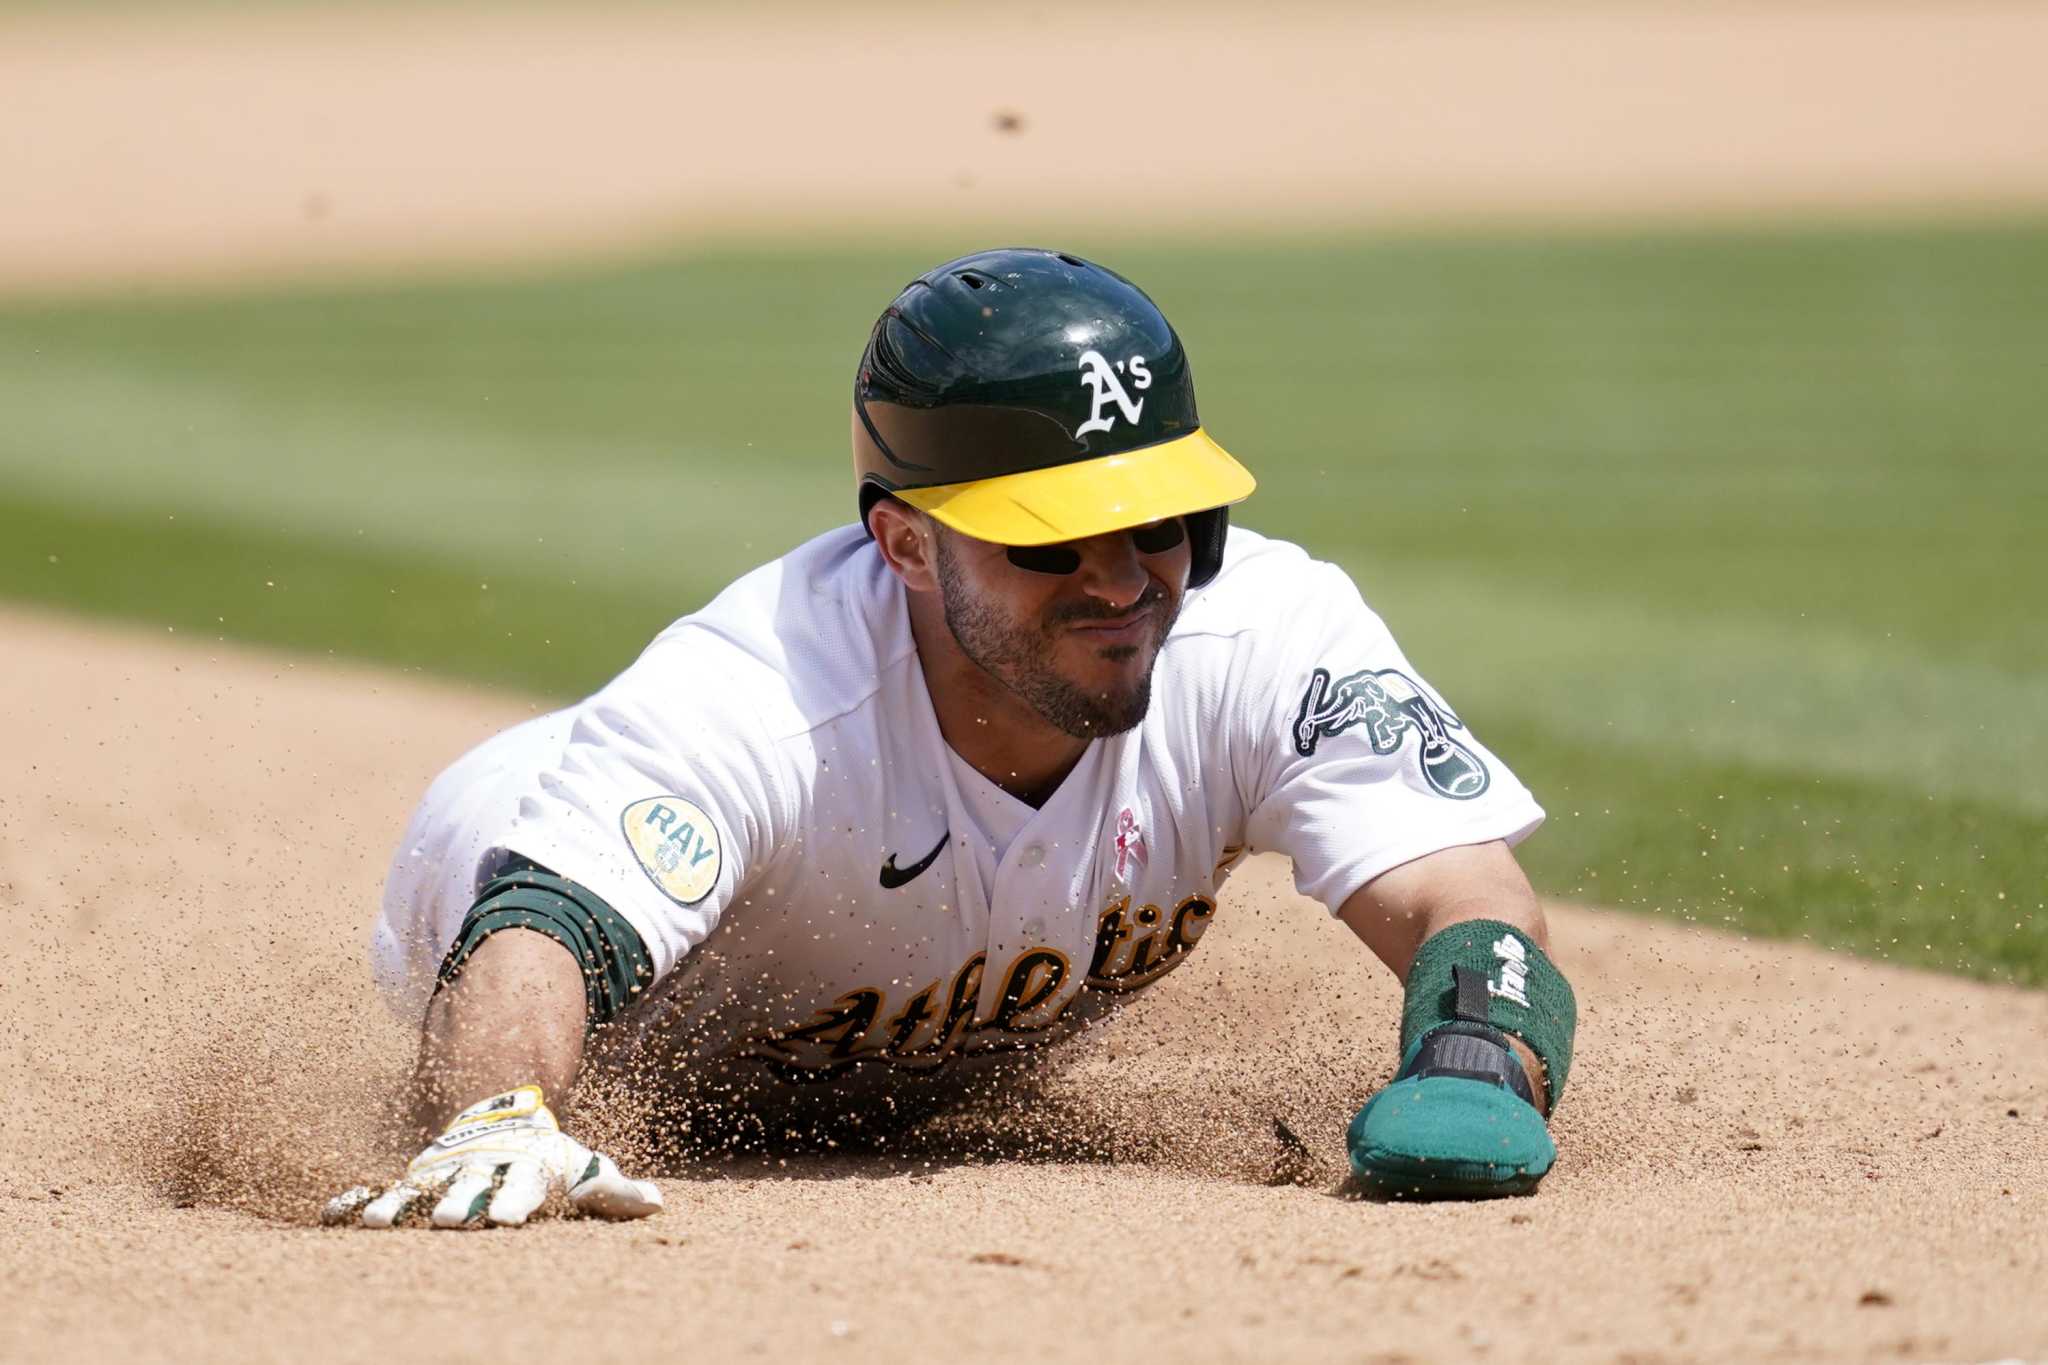 A's Ramón Laureano 'day-to-day' after HBP to hand, but Frankie Montas is OK